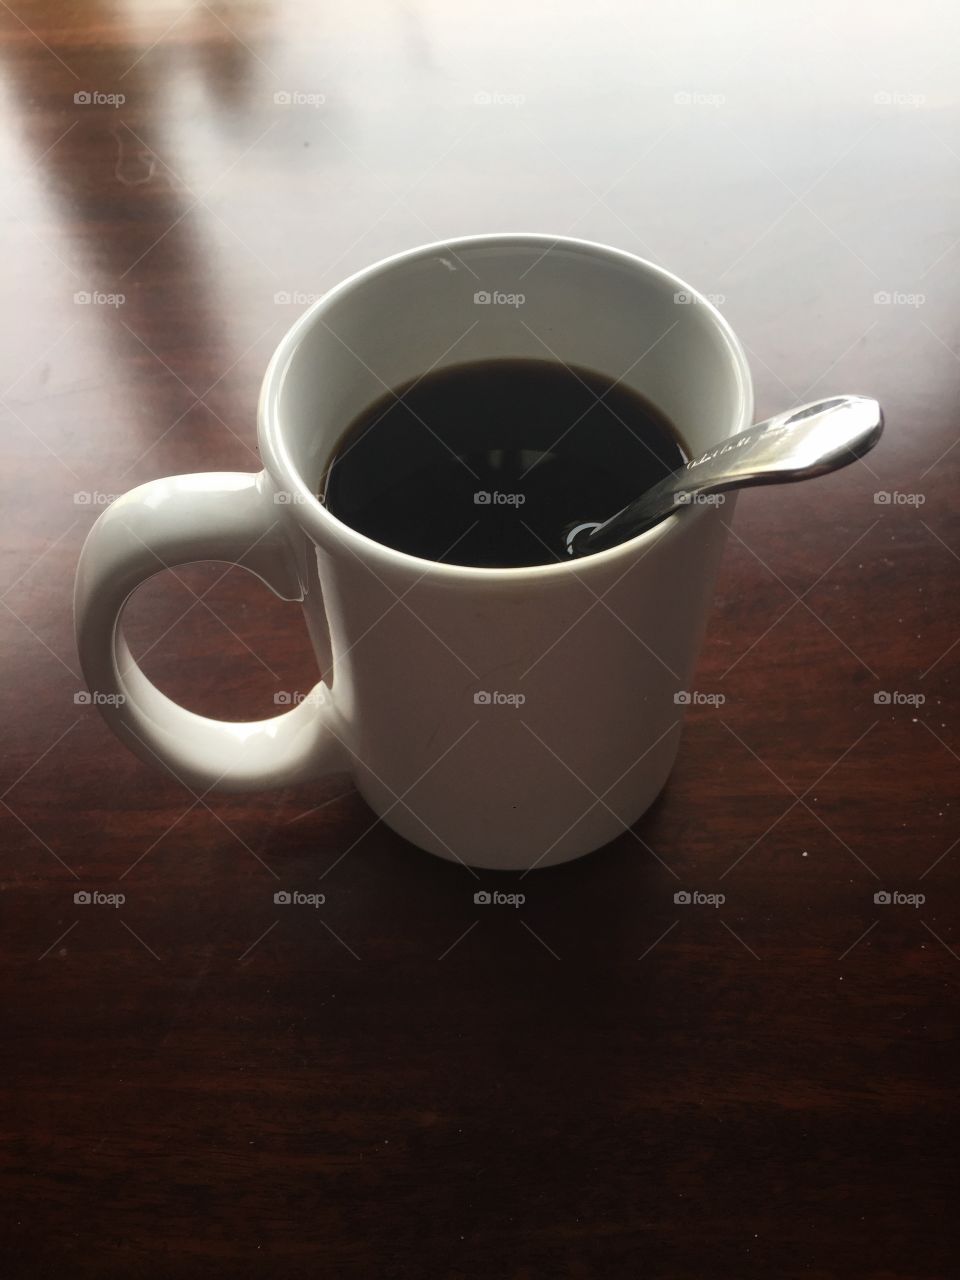 A cup of black coffee as seen from the side and above. The mug is white and there is a solver spoon in the coffee.